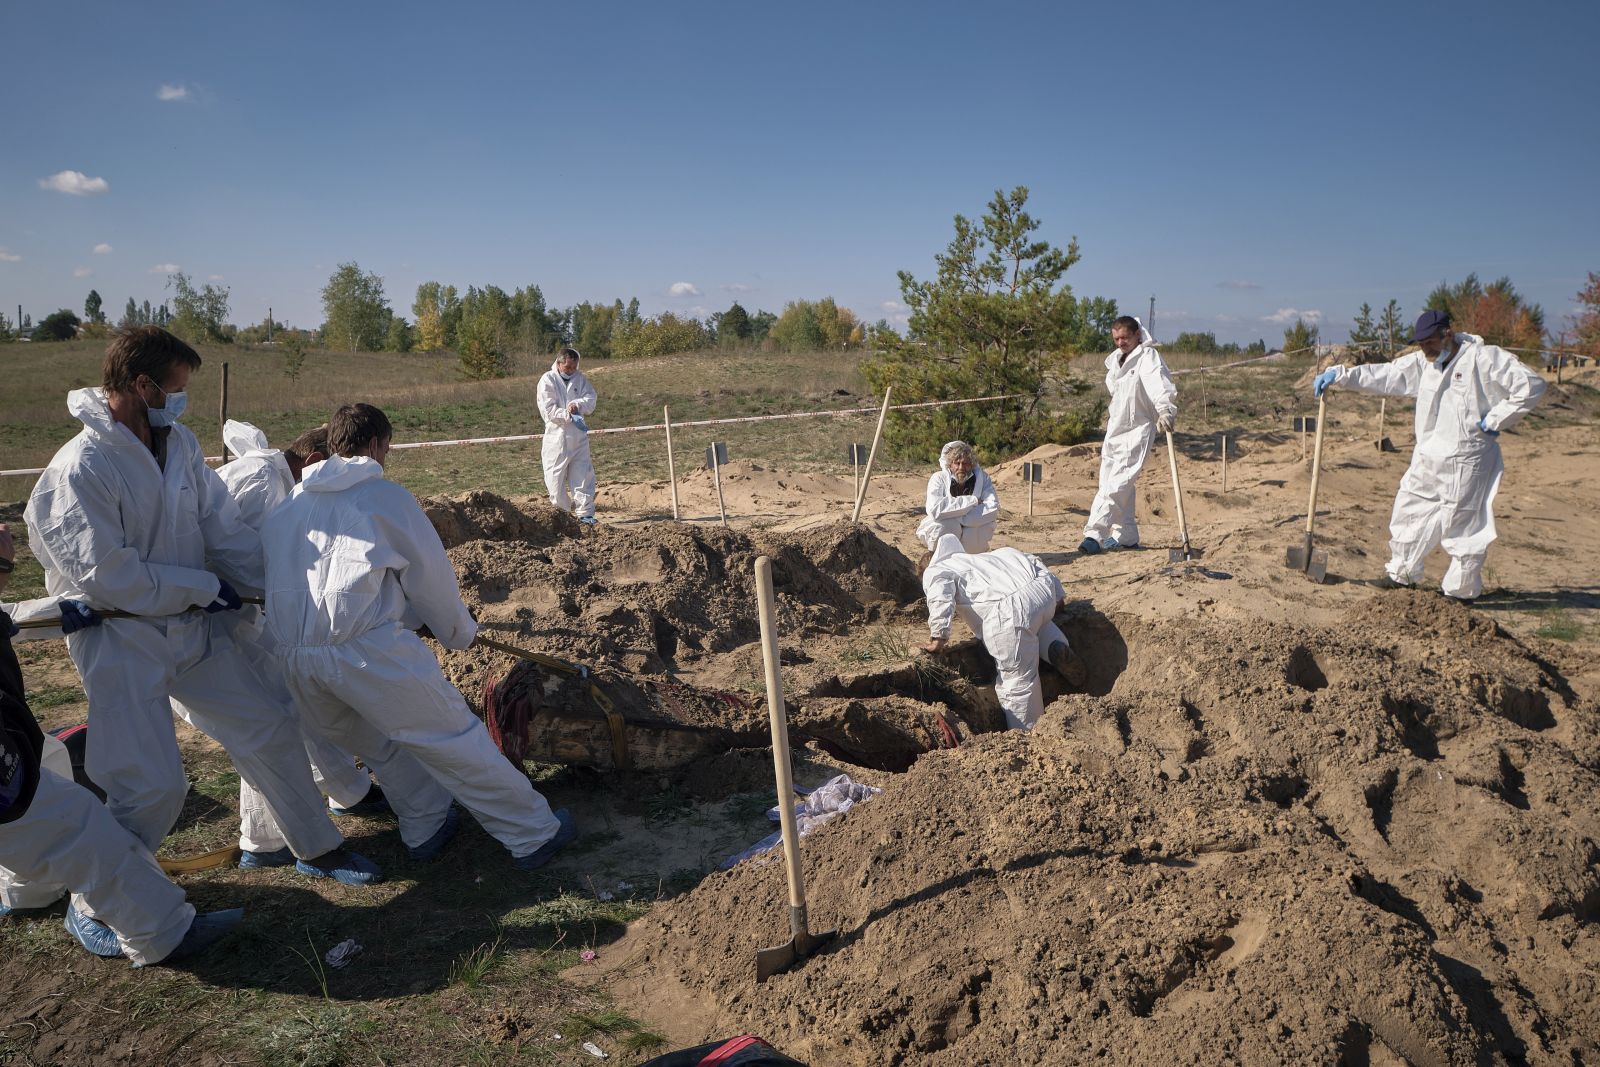 epa10229372 Forensic technicians work at a burial site near the recently recaptured city of Lyman, Donetsk area, Ukraine, 07 October 2022. A burial site with more than 50 graves was found after Ukrainian troops recaptured the town of Lyman. Ukrainian authorities have started exhuming and indentifying the bodies of the partially unmarked graves. Russian troops entered Ukraine territory on 24 February 2022, starting a conflict that has provoked destruction and a humanitarian crisis.  EPA/YEVGEN HONCHARENKO